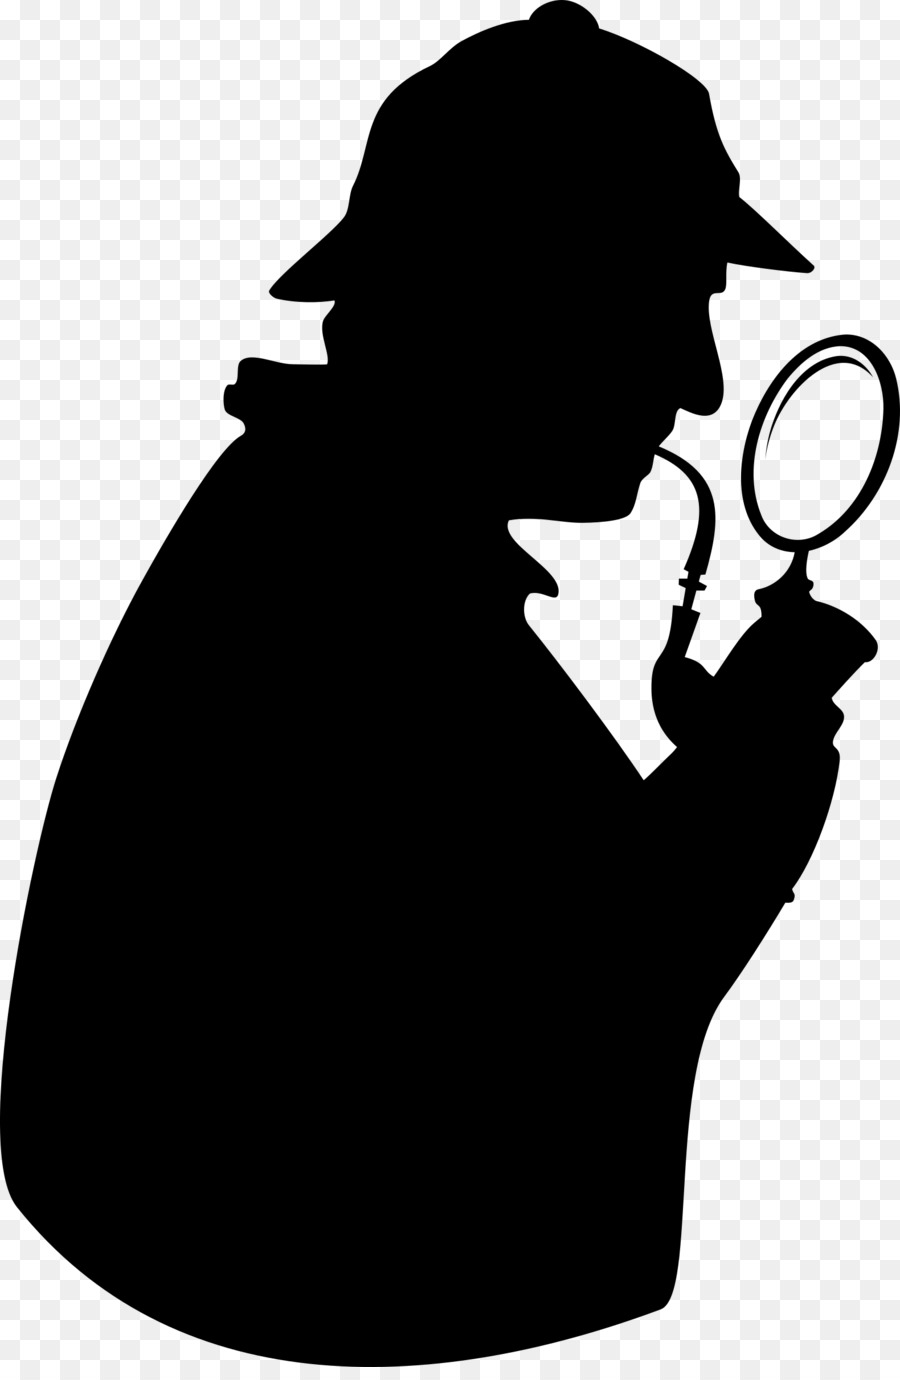 Detective Magnifying glass Sherlock Holmes Clip art - silhouette of characters png download - 1580*2400 - Free Transparent Detective png Download.